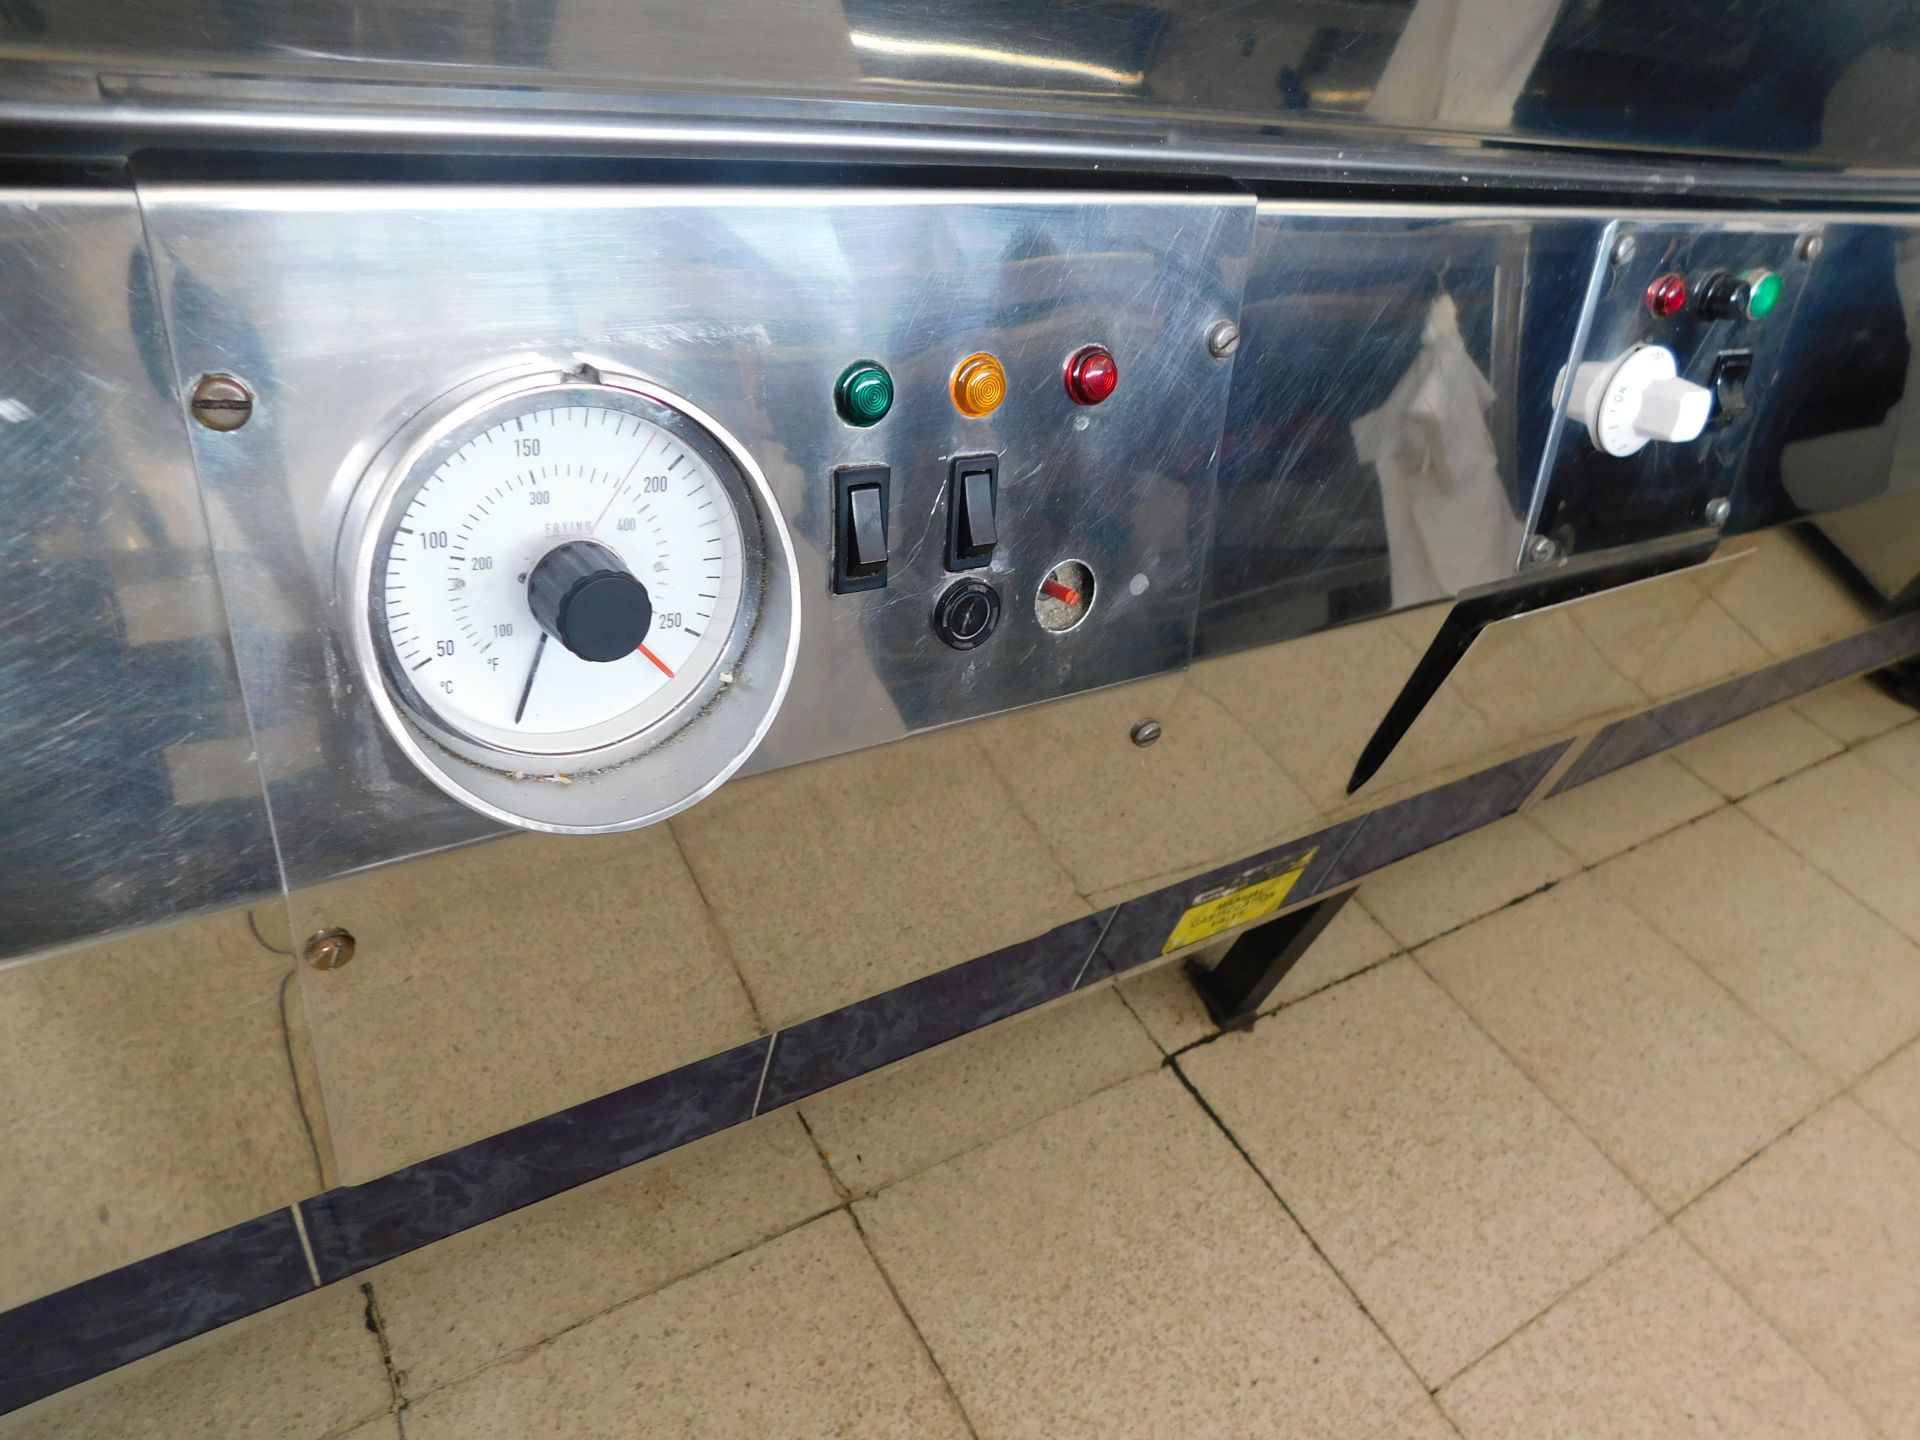 Stainless Steel Chip Fryer & Warming Range, 259cm x 108cm x 148cm (Buyer to Provide Qualified - Image 6 of 8